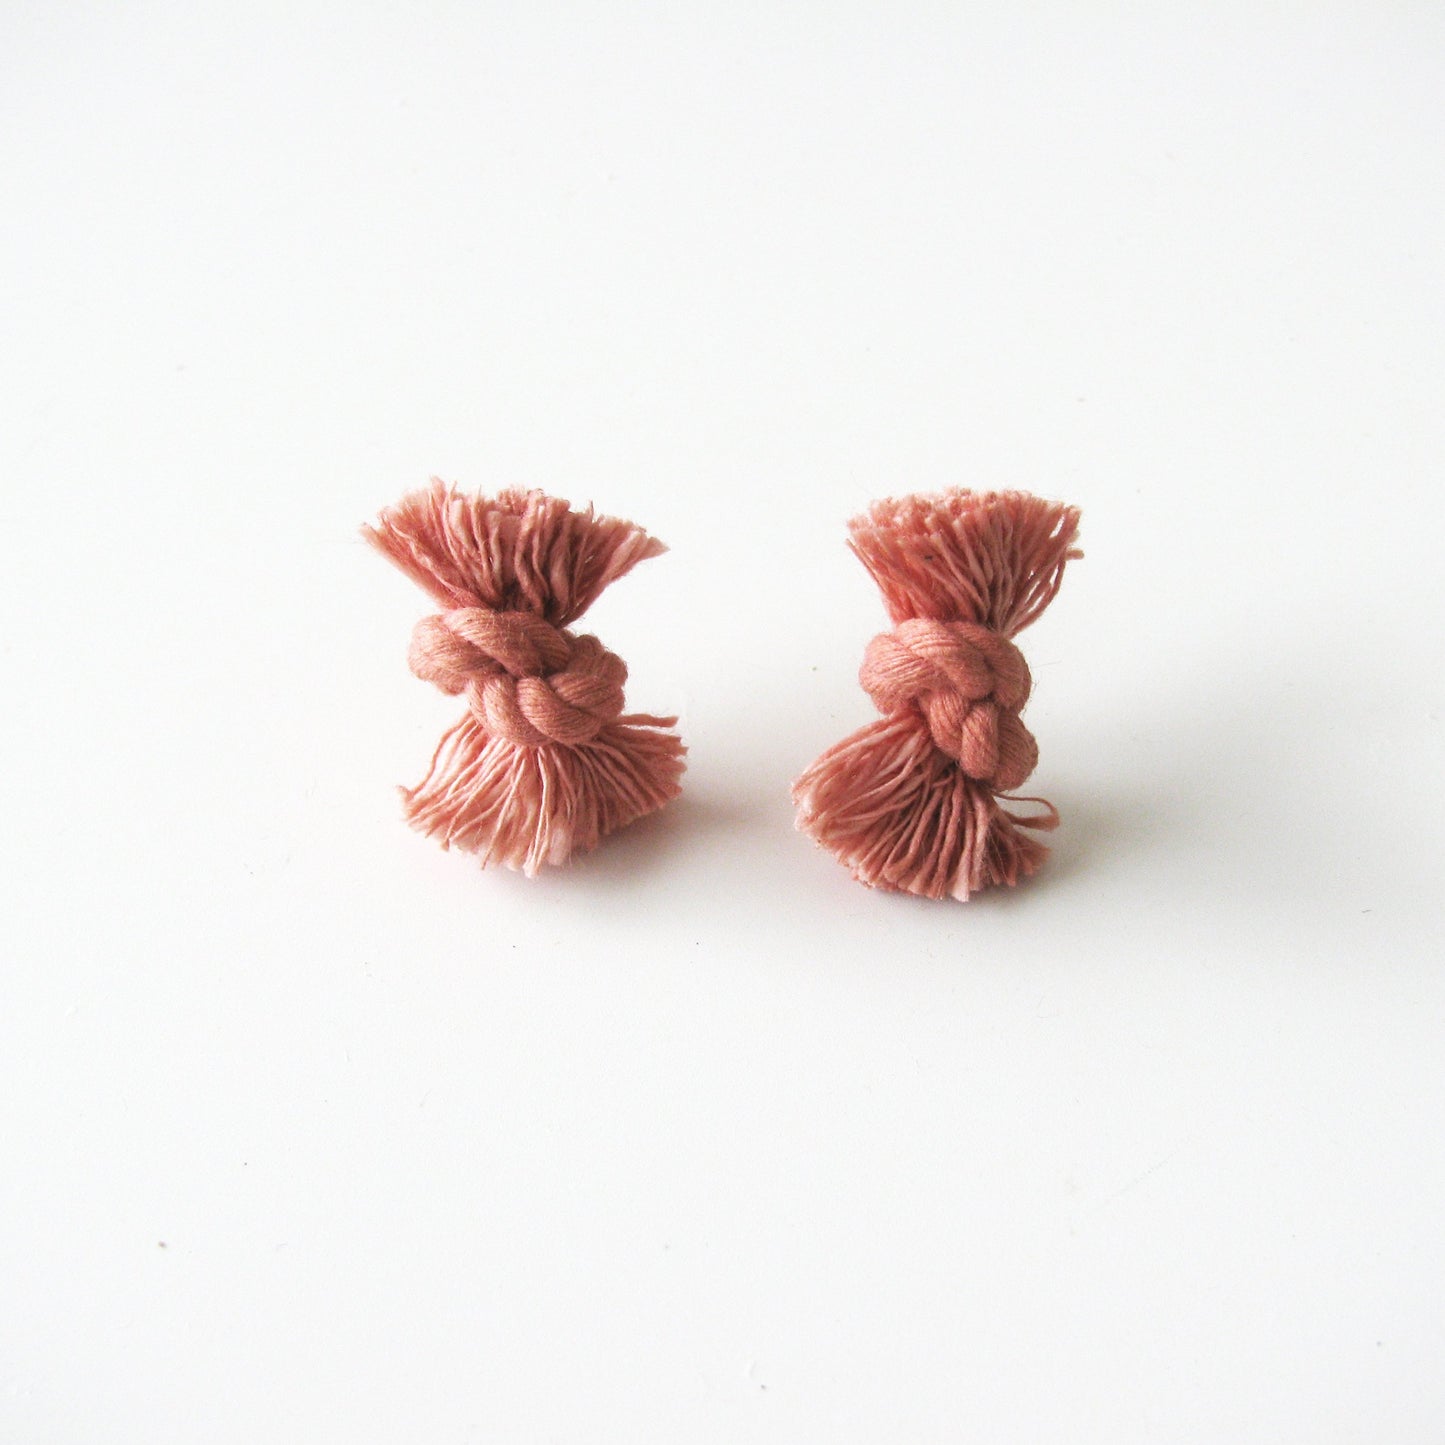 Dyed cotton rope knot earrings with titanium post in coral.